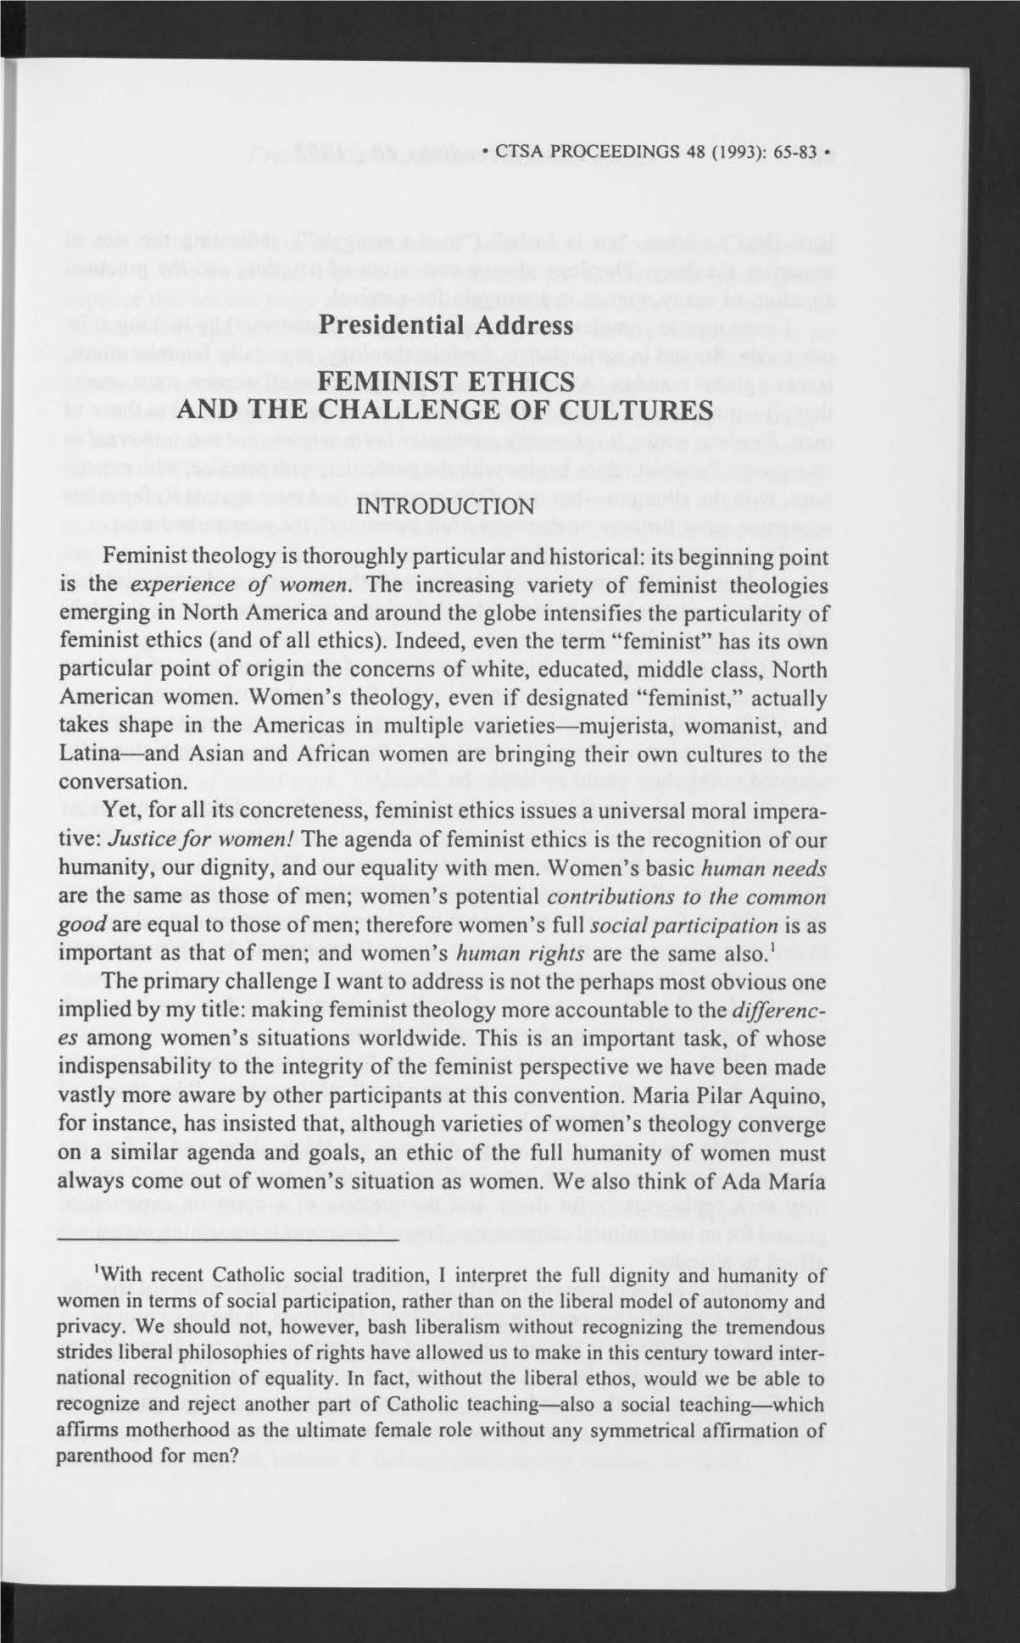 Presidential Address FEMINIST ETHICS and the CHALLENGE of CULTURES